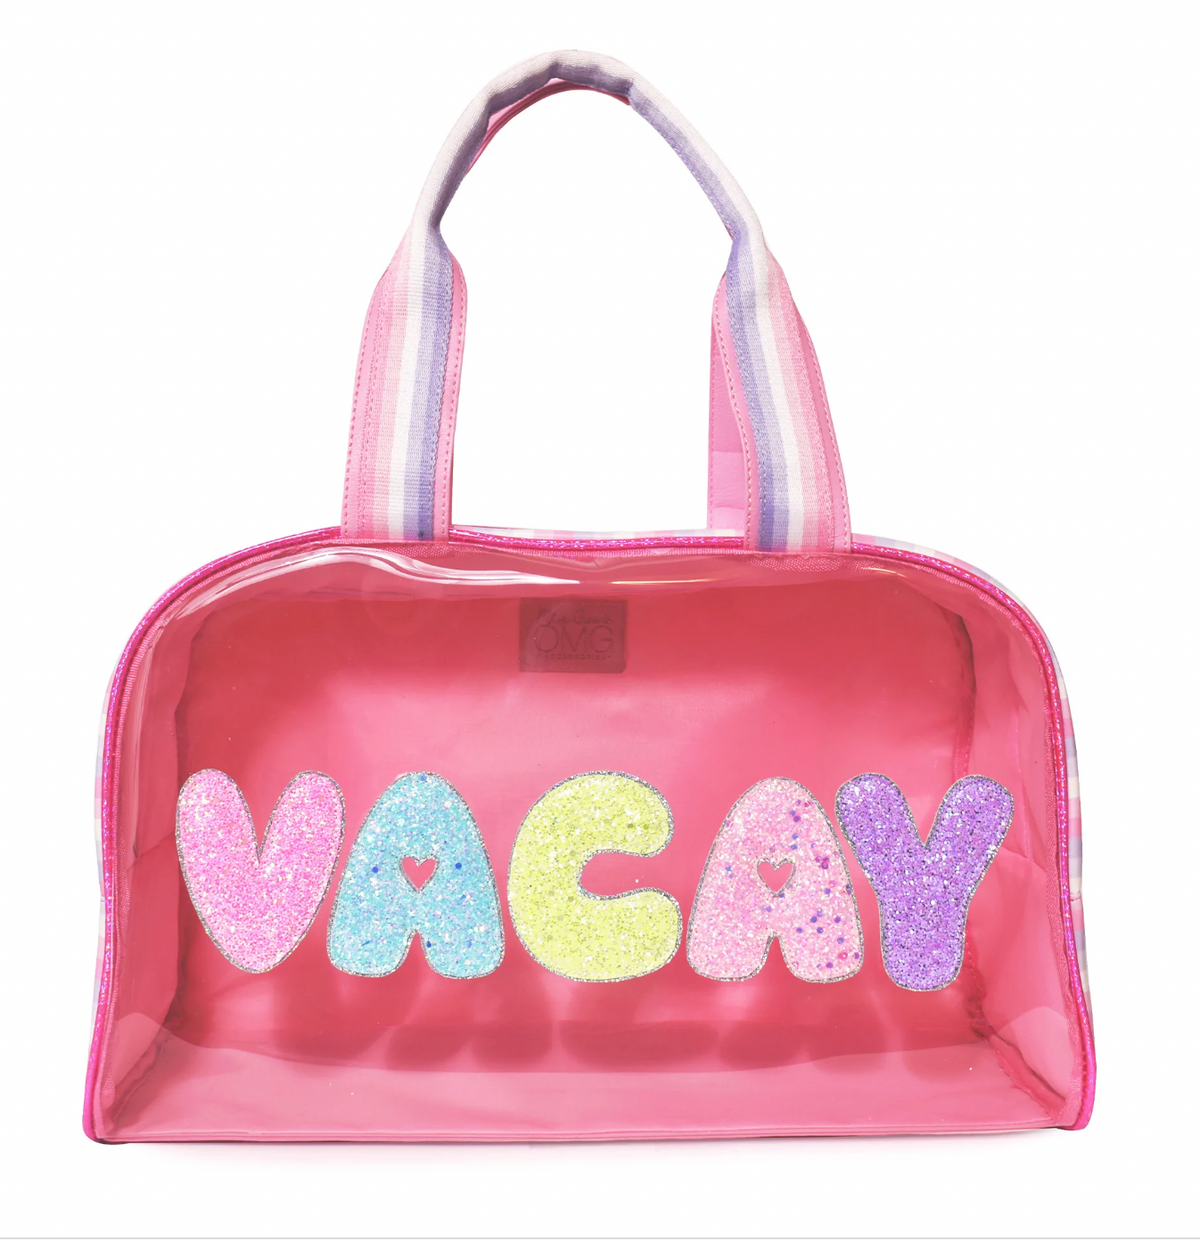 Glam Embroidered Letter Duffle Bag - Bubble Gum Vacay